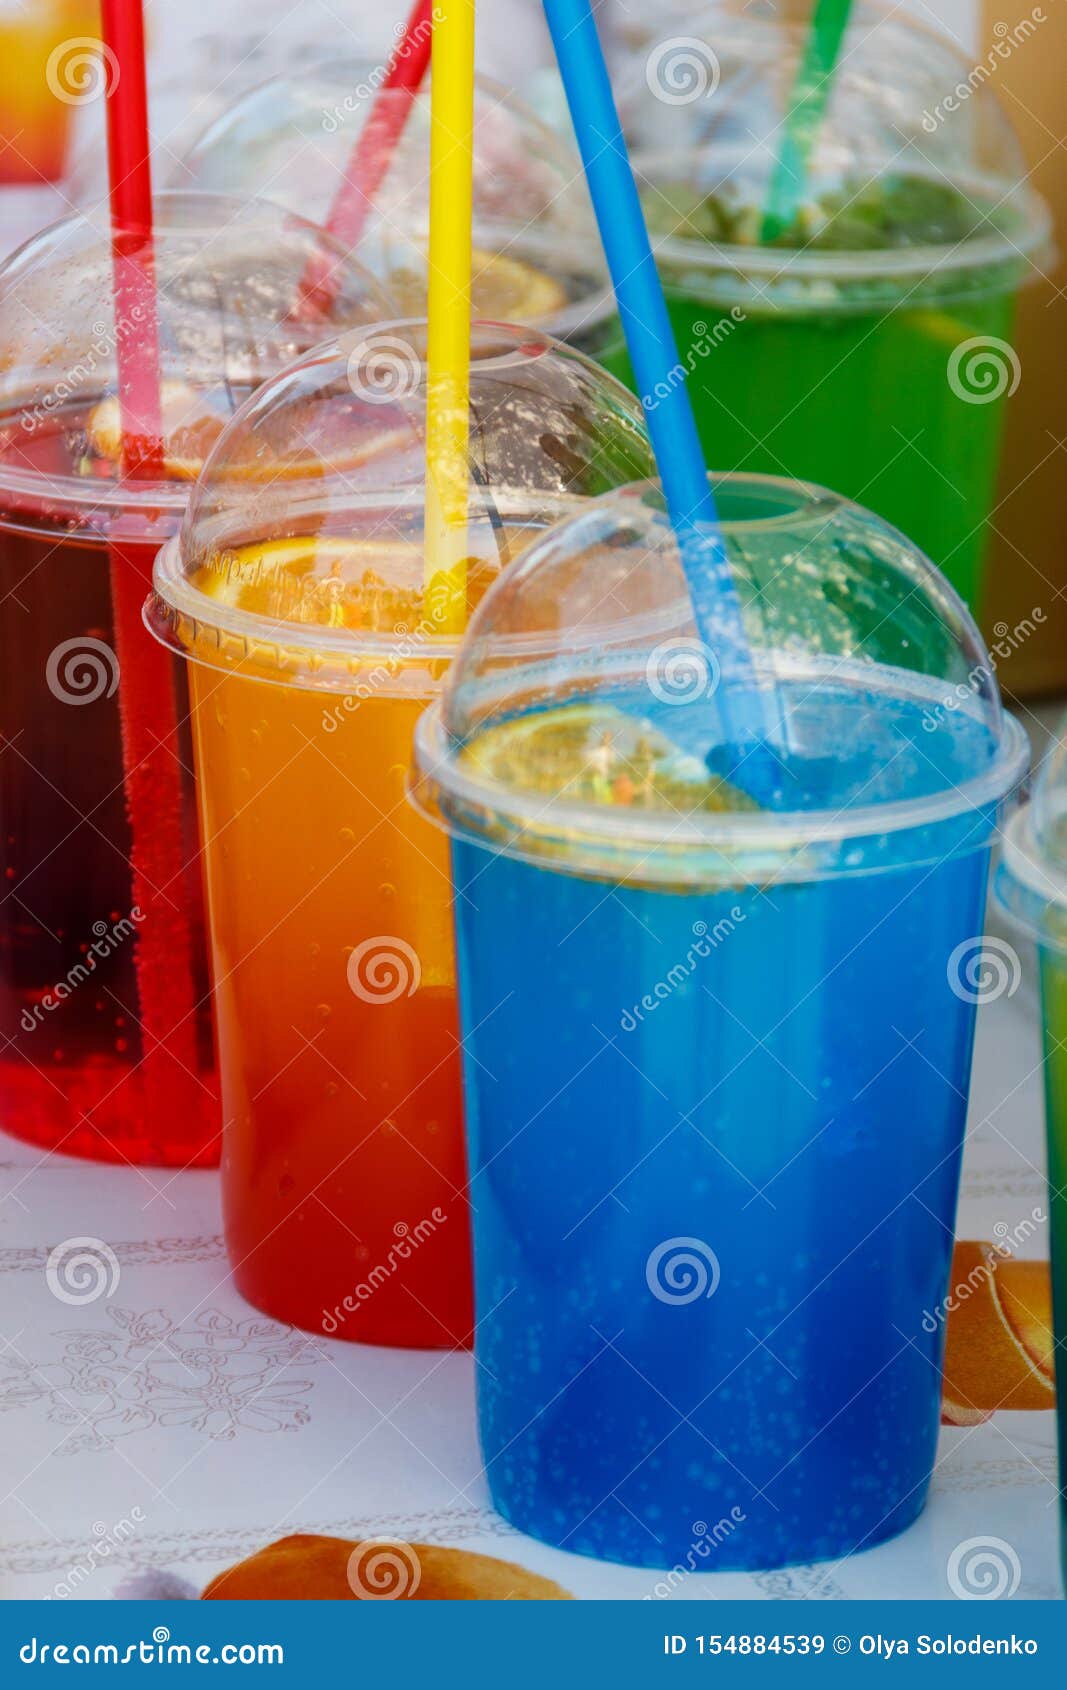 https://thumbs.dreamstime.com/z/colorful-cold-toning-cocktails-plastic-cups-cocktail-straws-154884539.jpg